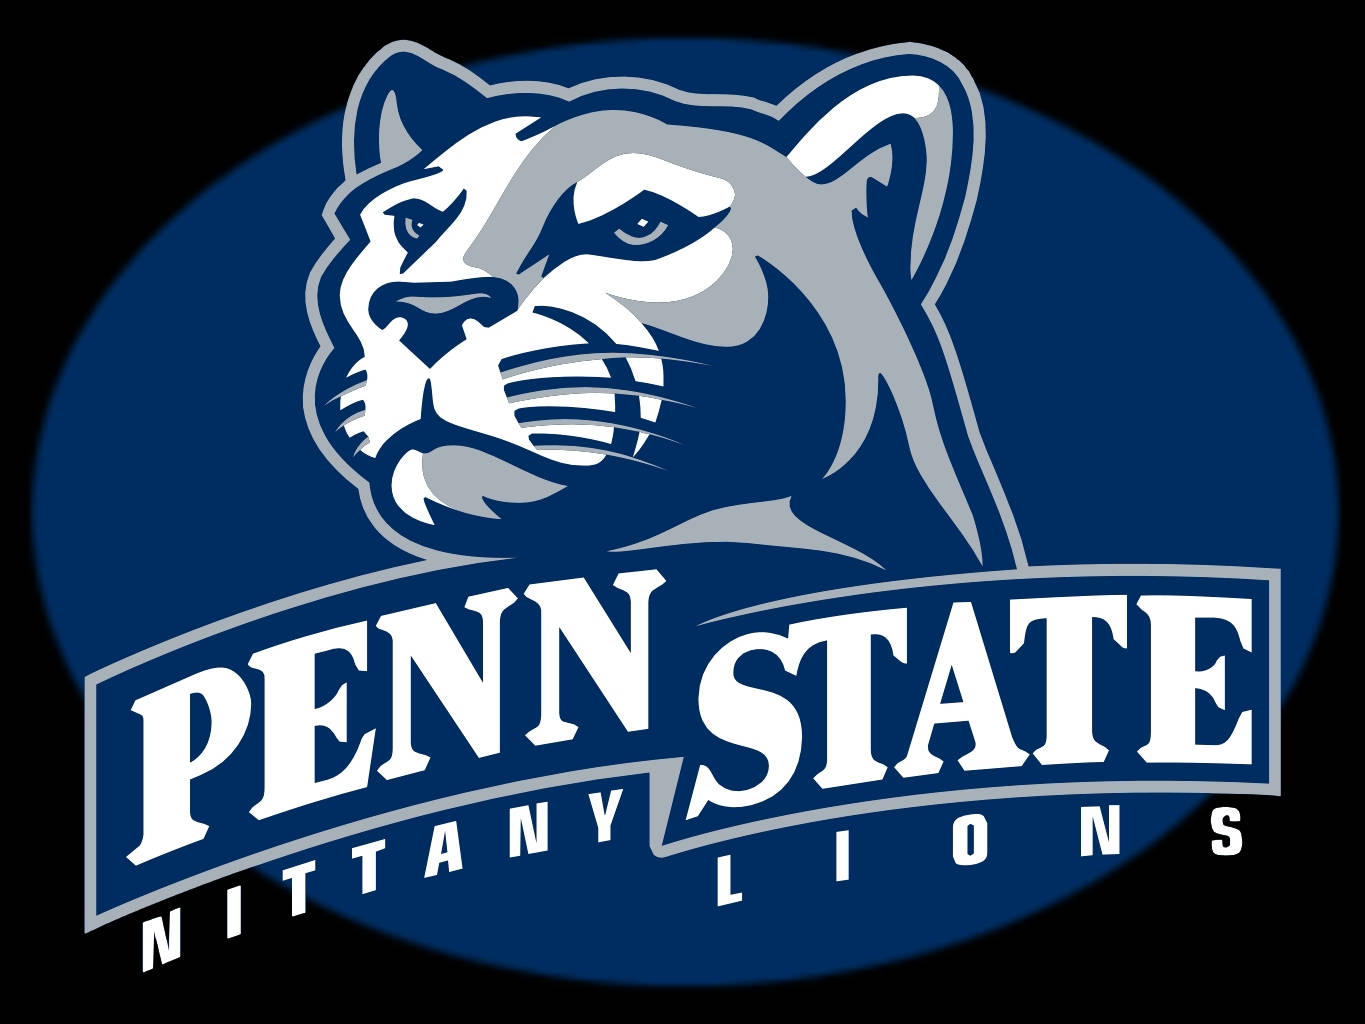 download-penn-state-nittany-lions-logo-wallpaper-wallpapers